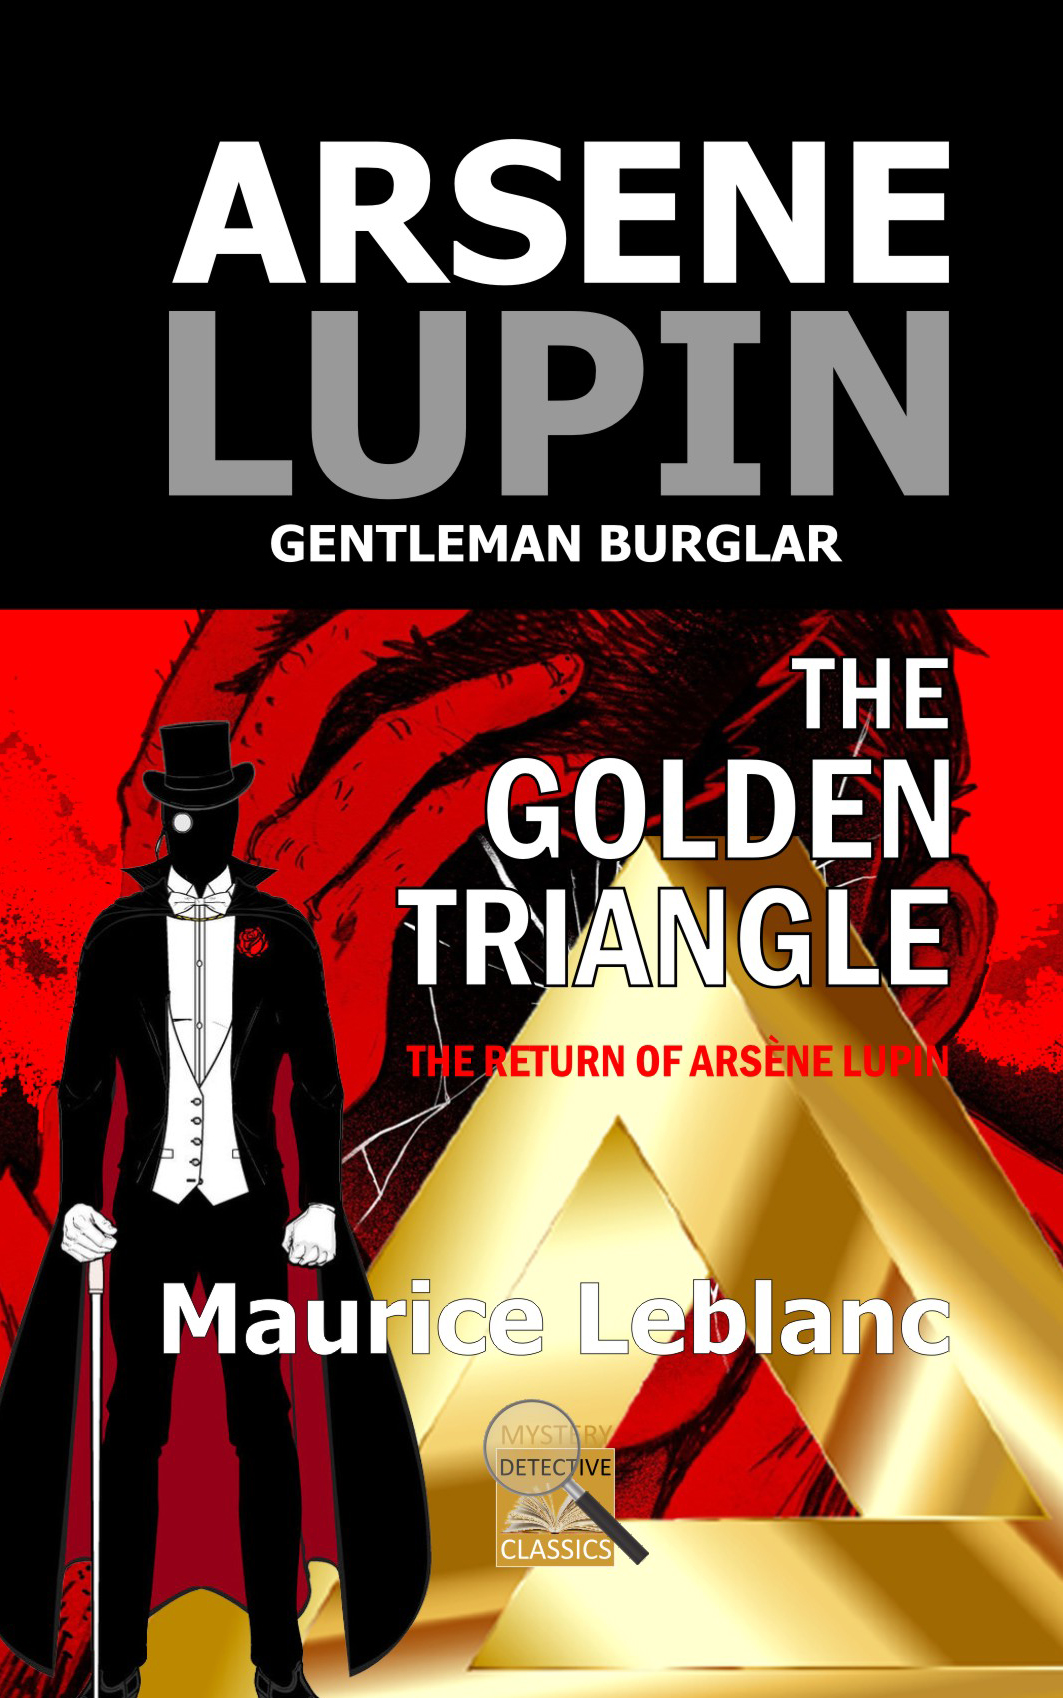 Cl 320 The Golden Triangle The Return Of ArsÈne Lupin Maurice Leblanc Smart Doc Posters 2287